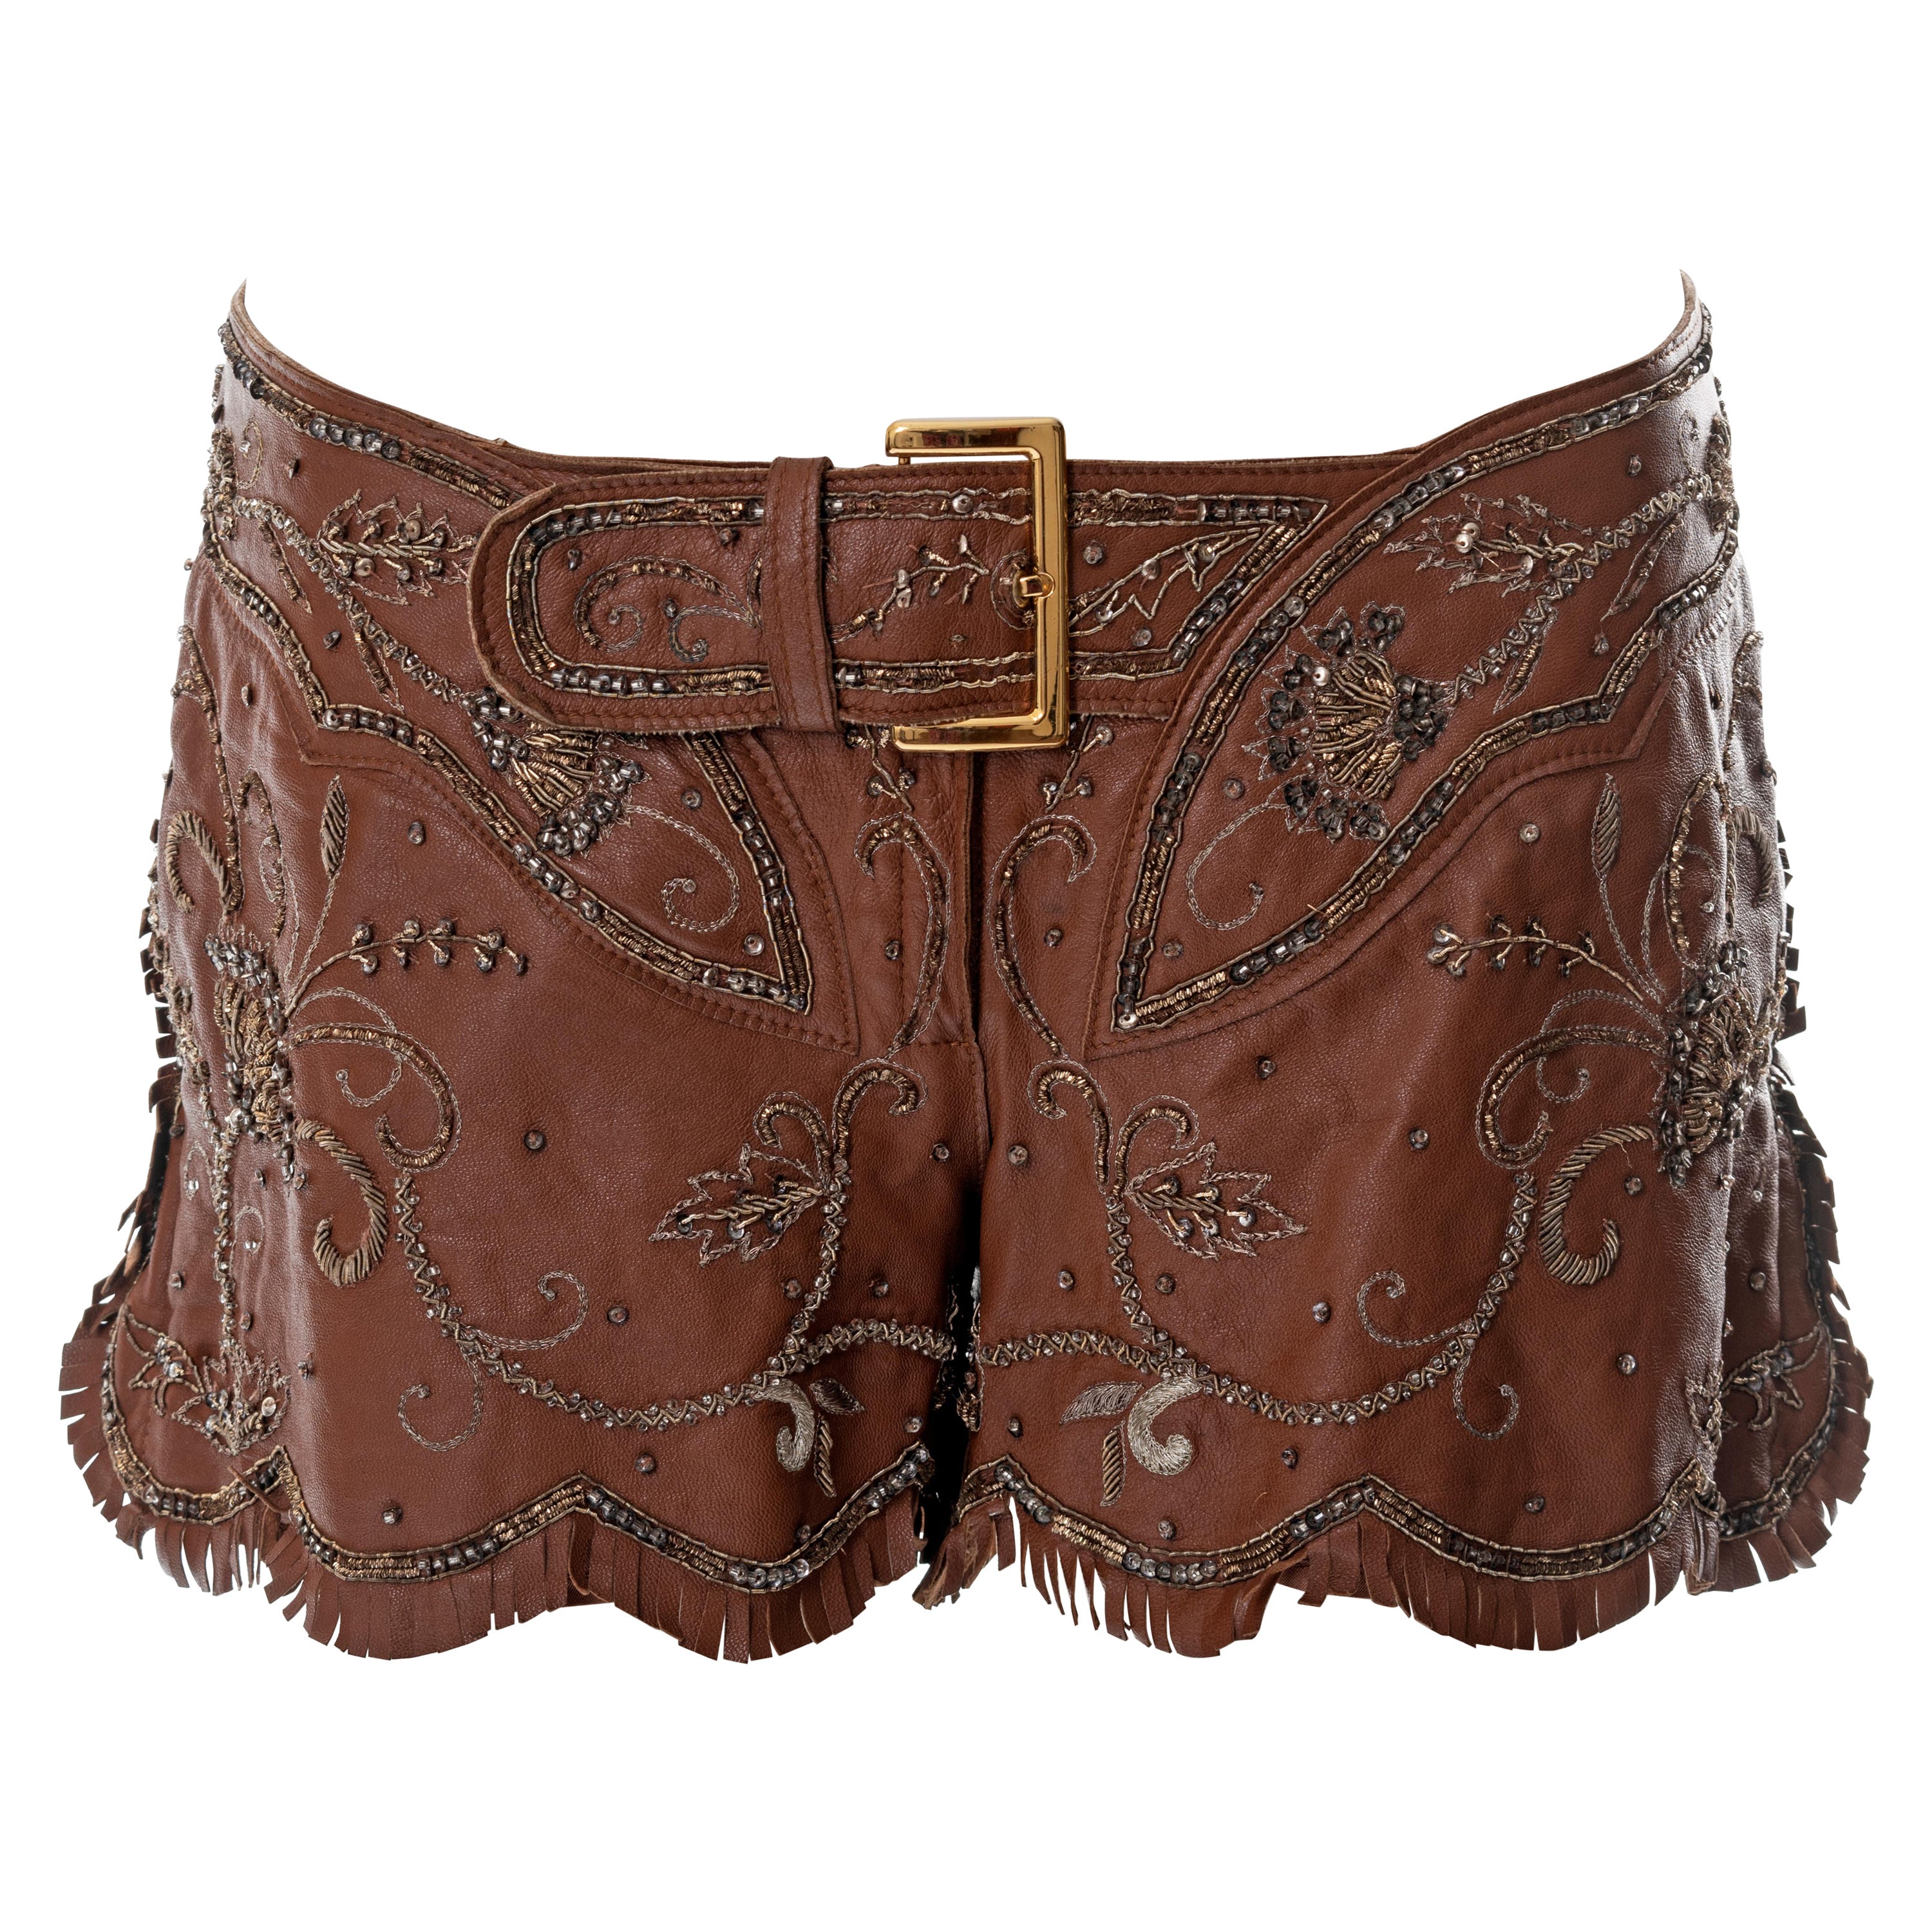 Dolce & Gabbana embroidered brown leather hot pants, ss 2001